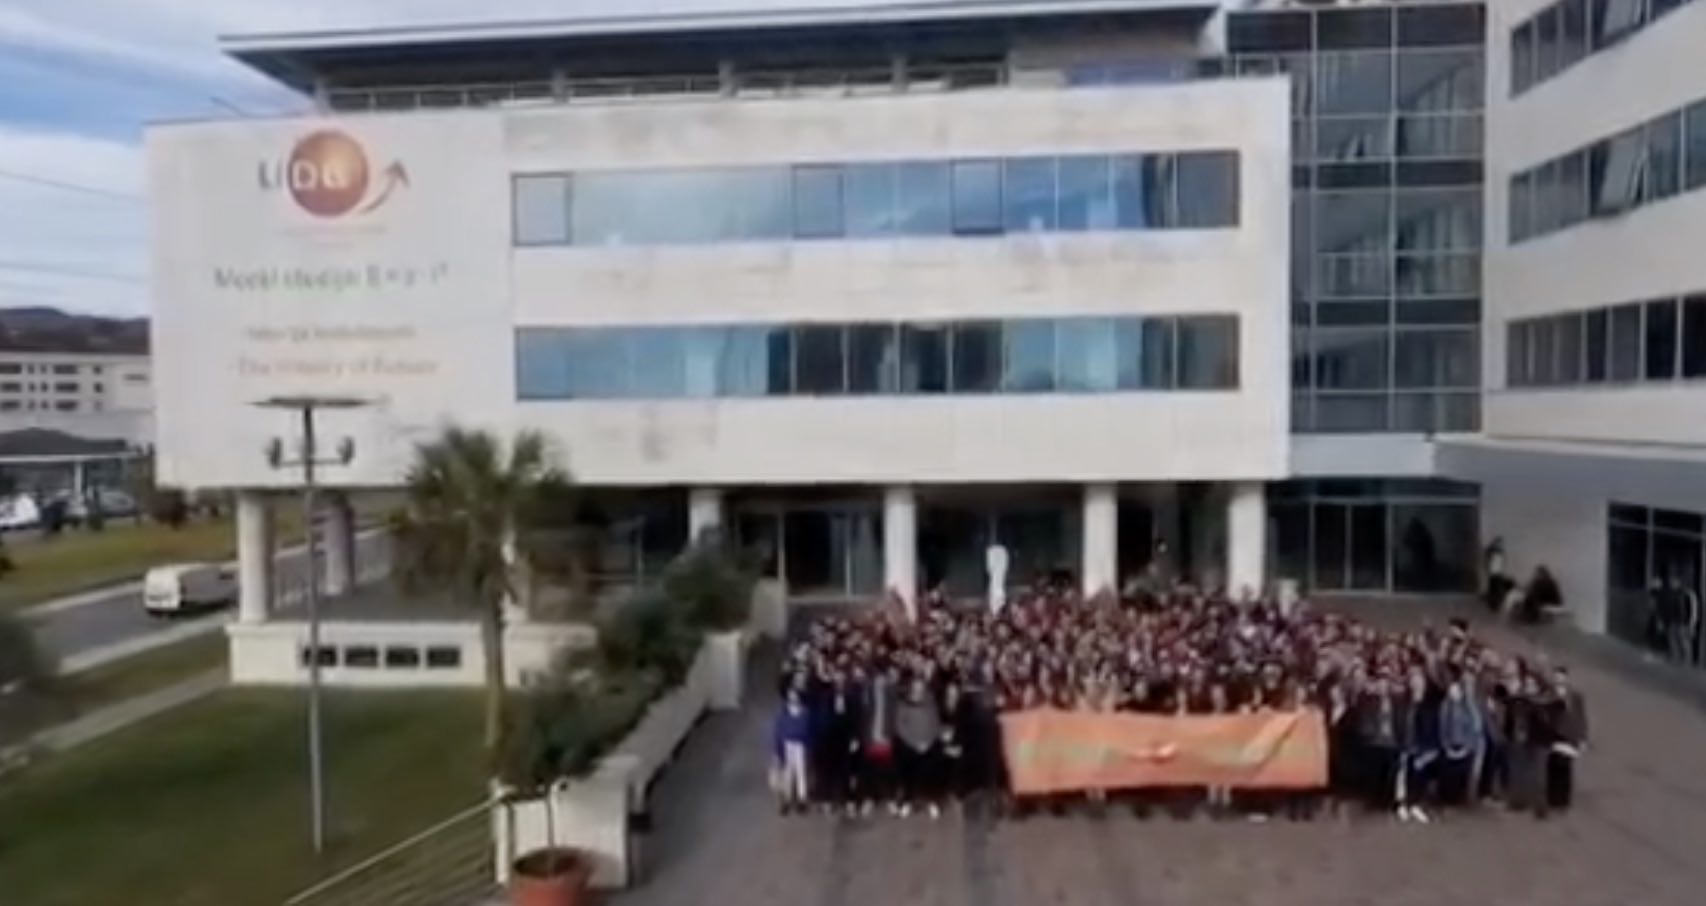 “Go Wuhan! Go China!” Montenegro university students and professors offer support in video message